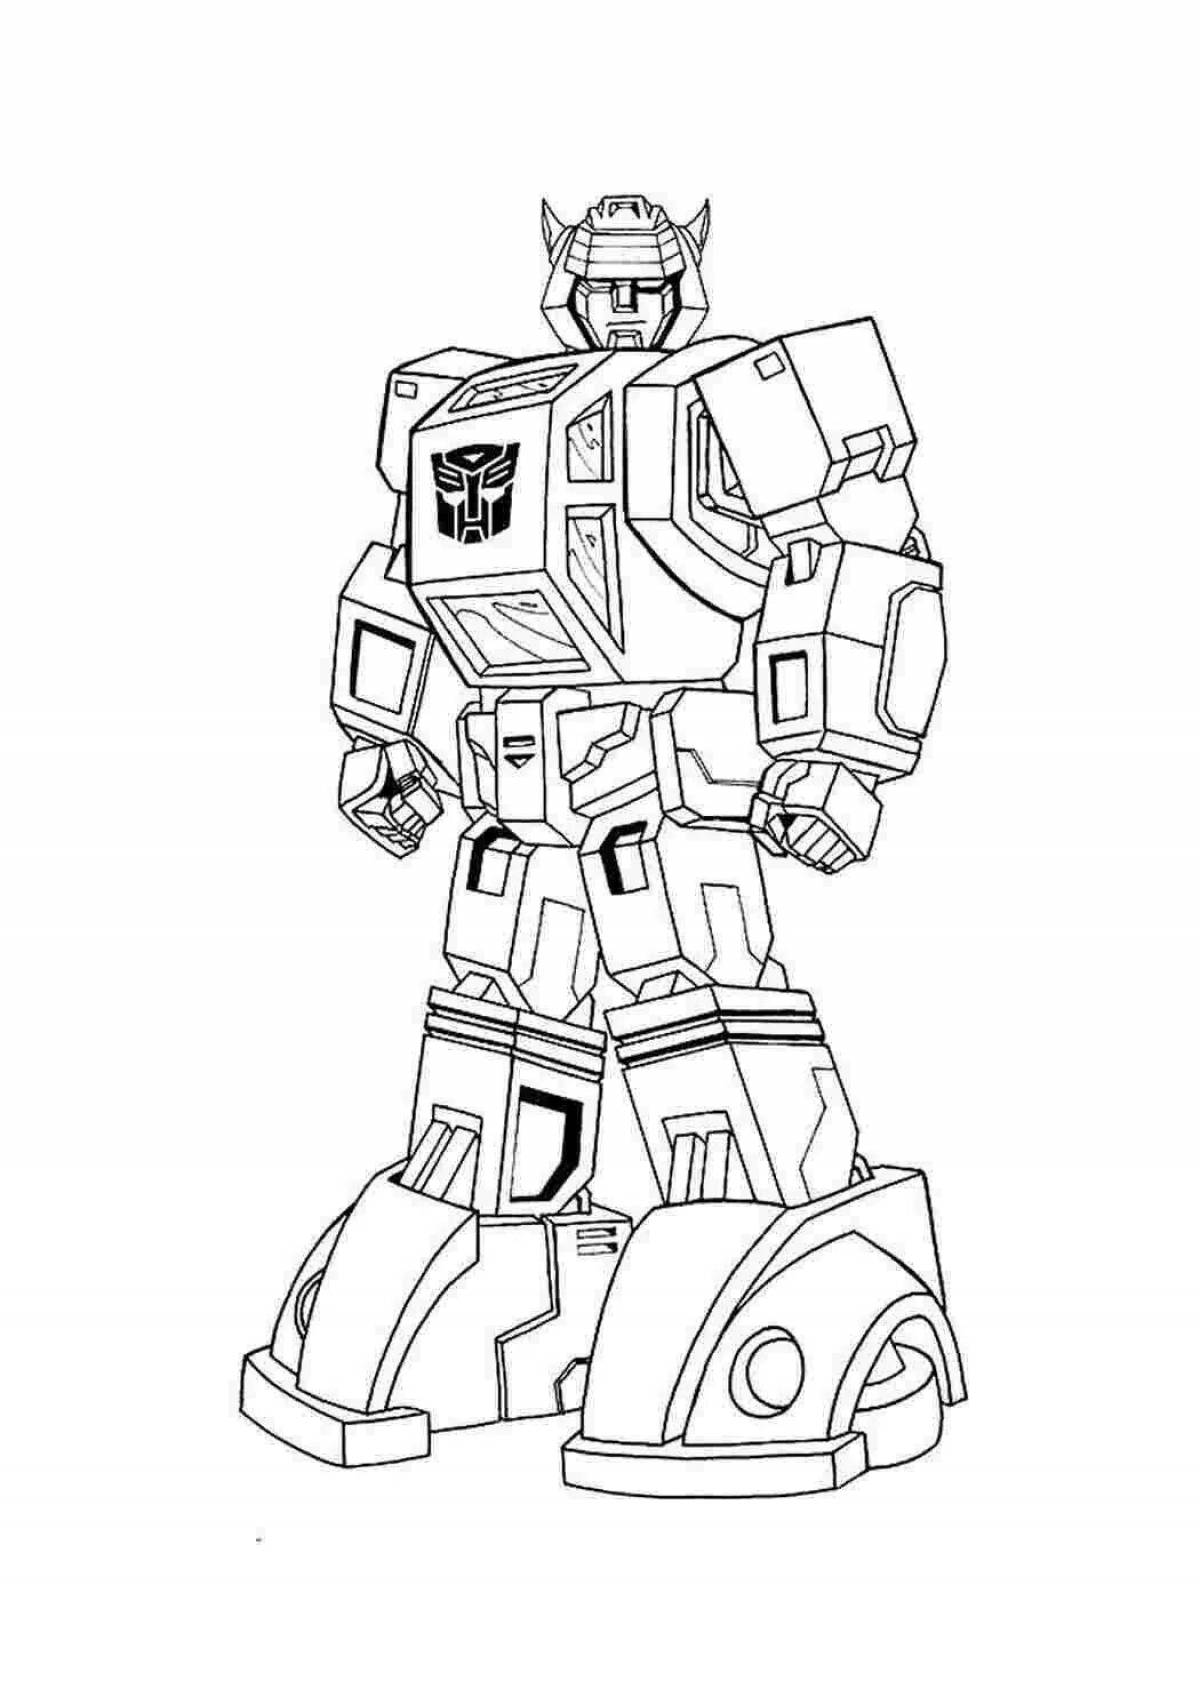 Awesome bumblebee robot coloring page